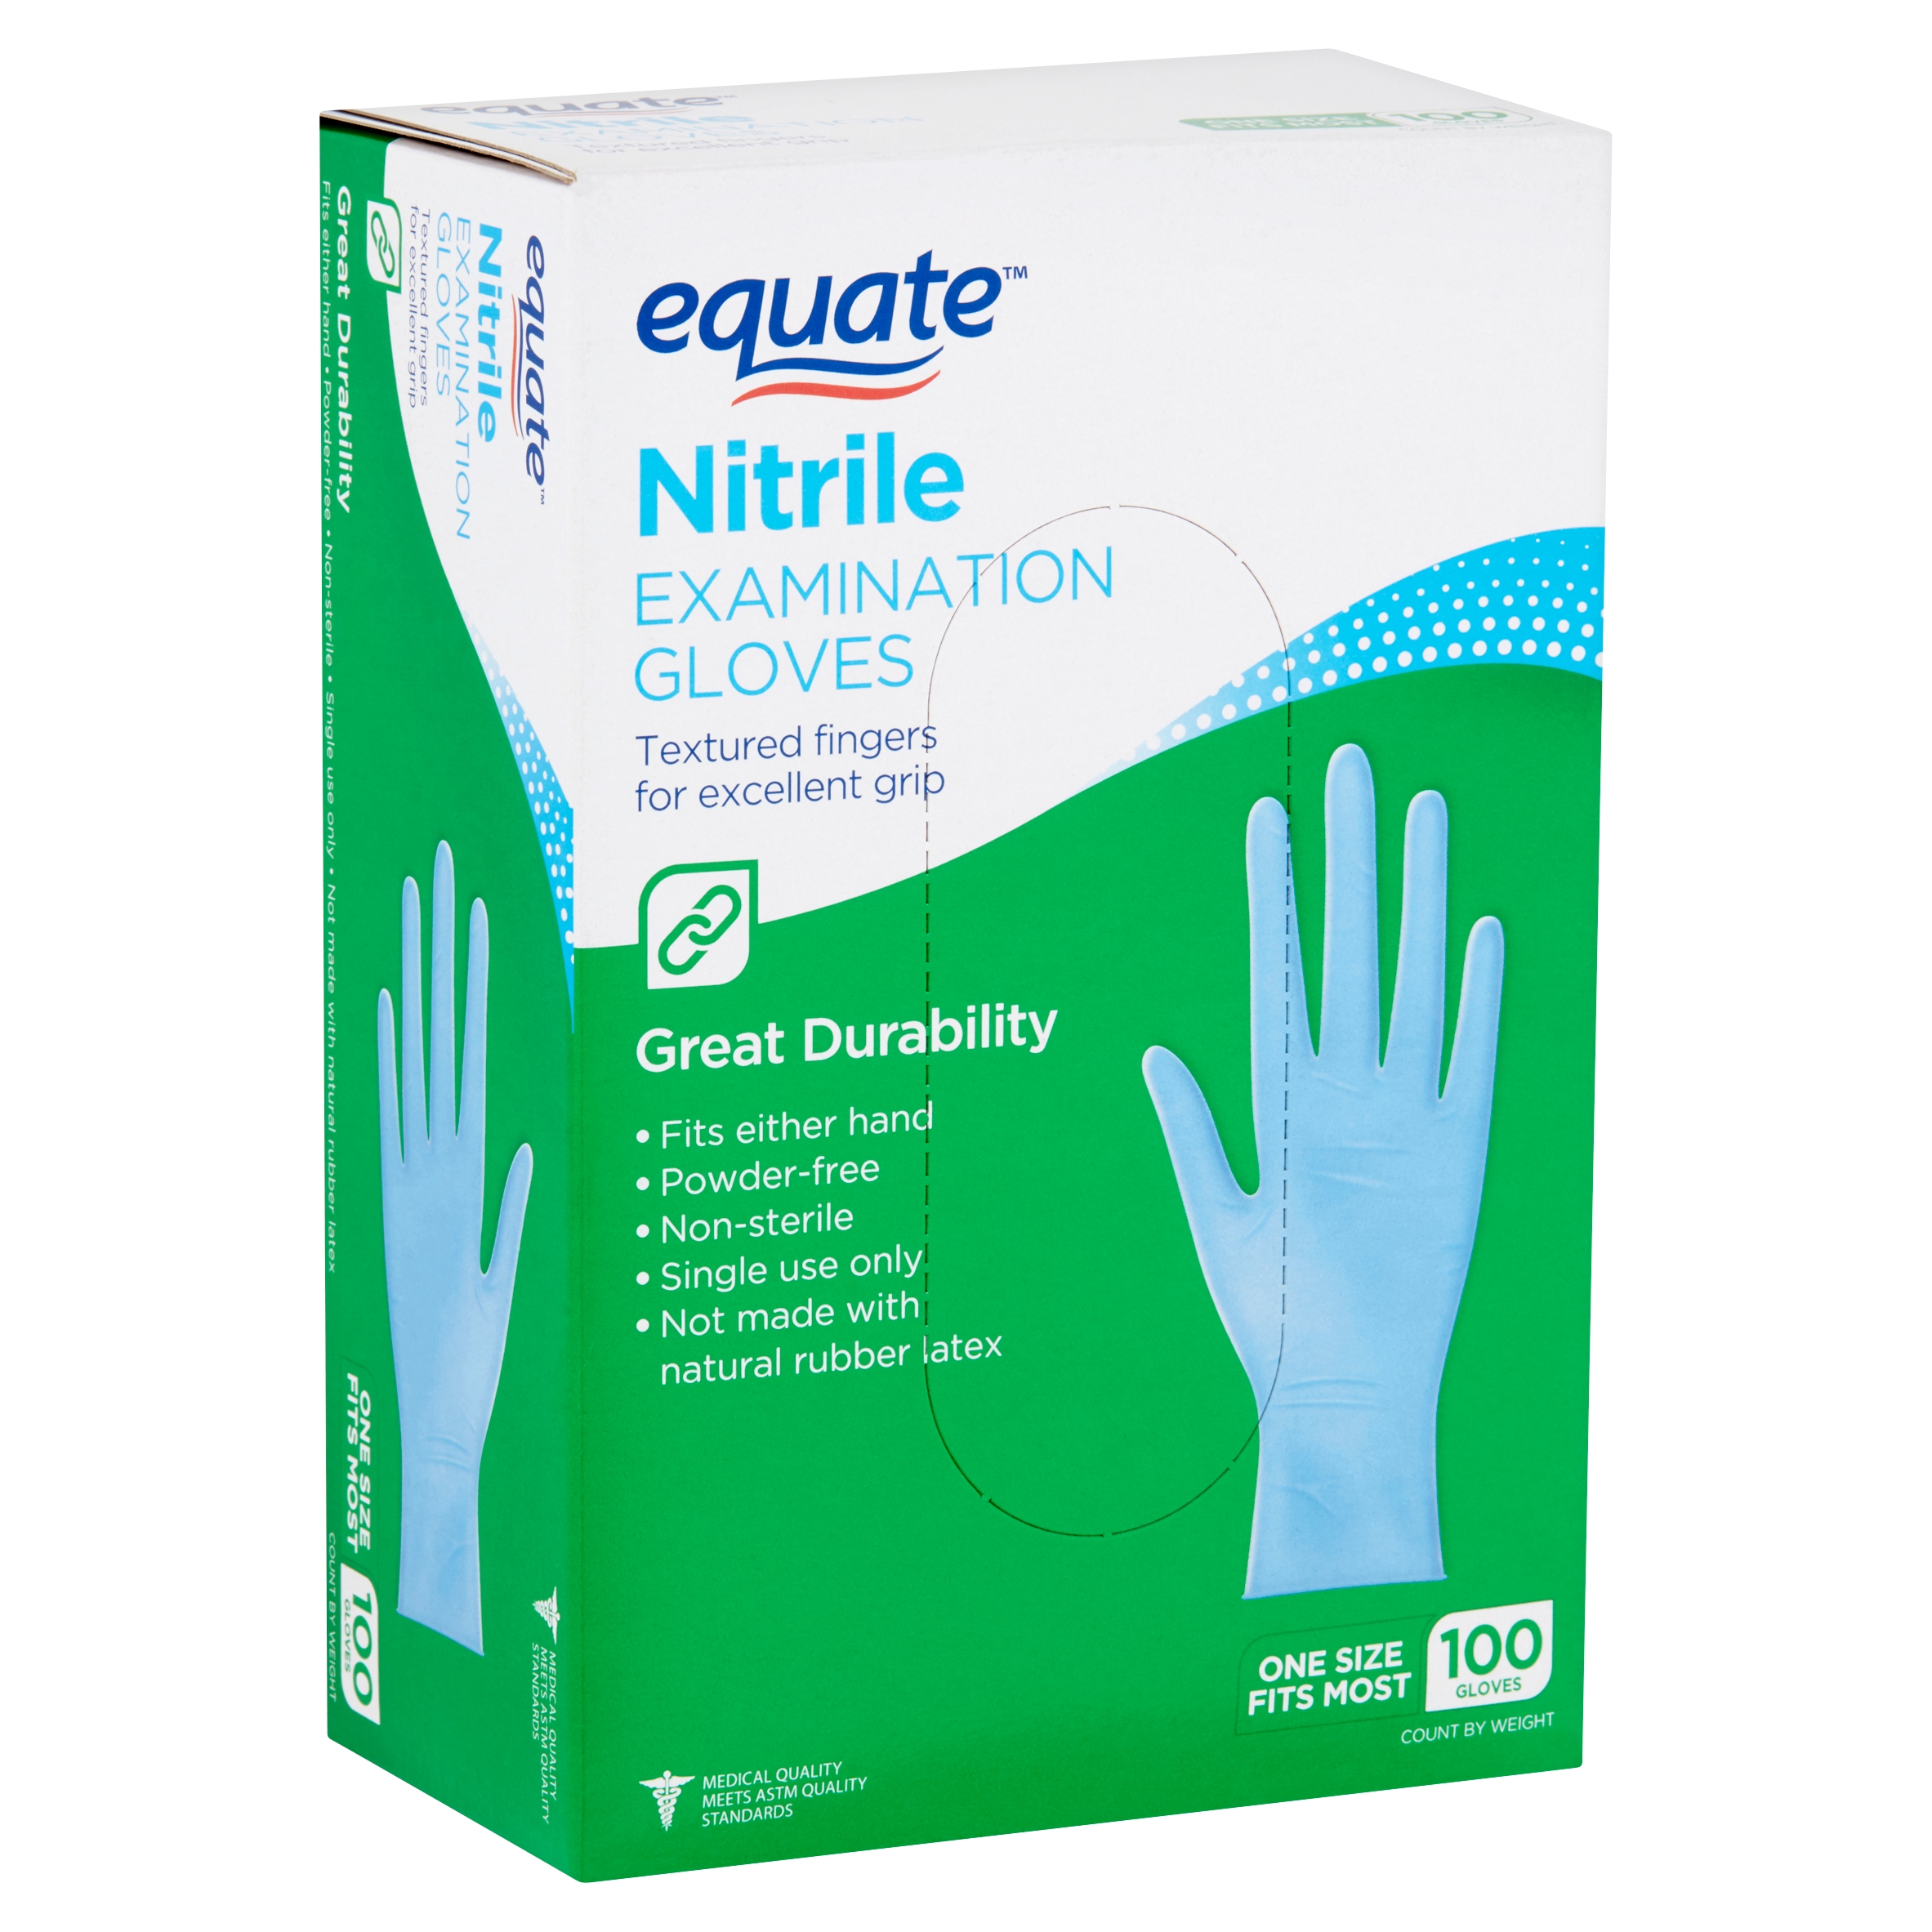 Equate Nitrile Examination Gloves, 100 count - image 1 of 10